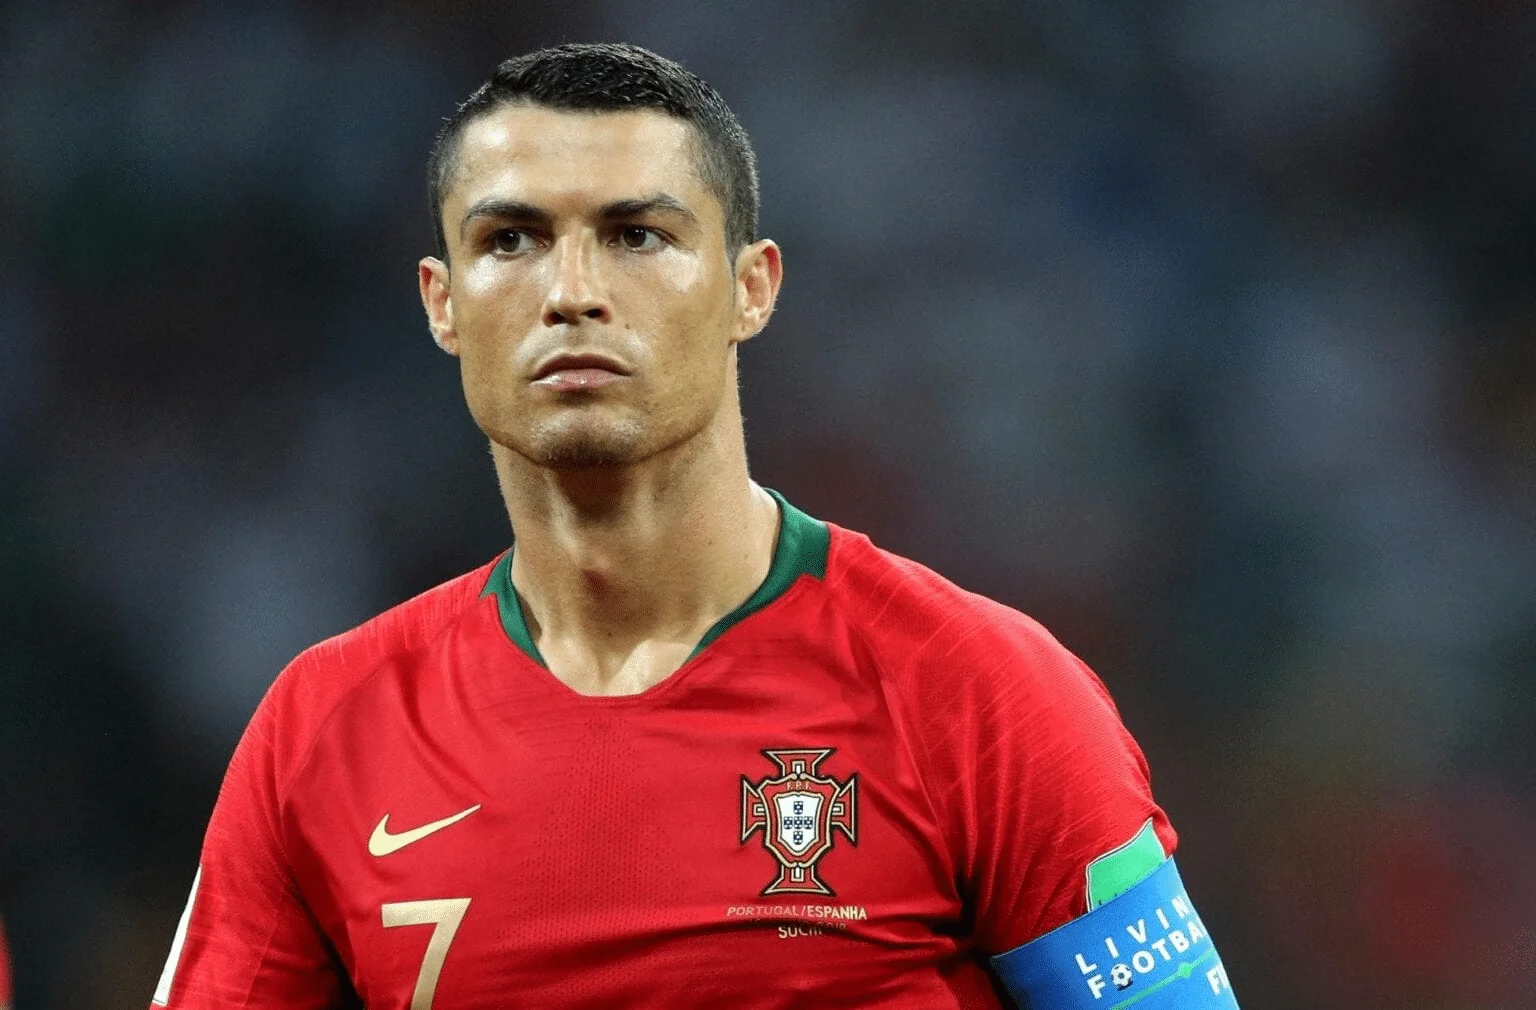 Cristiano Ronaldo's 'Main Goal' Is To Win The World Cup With Portugal